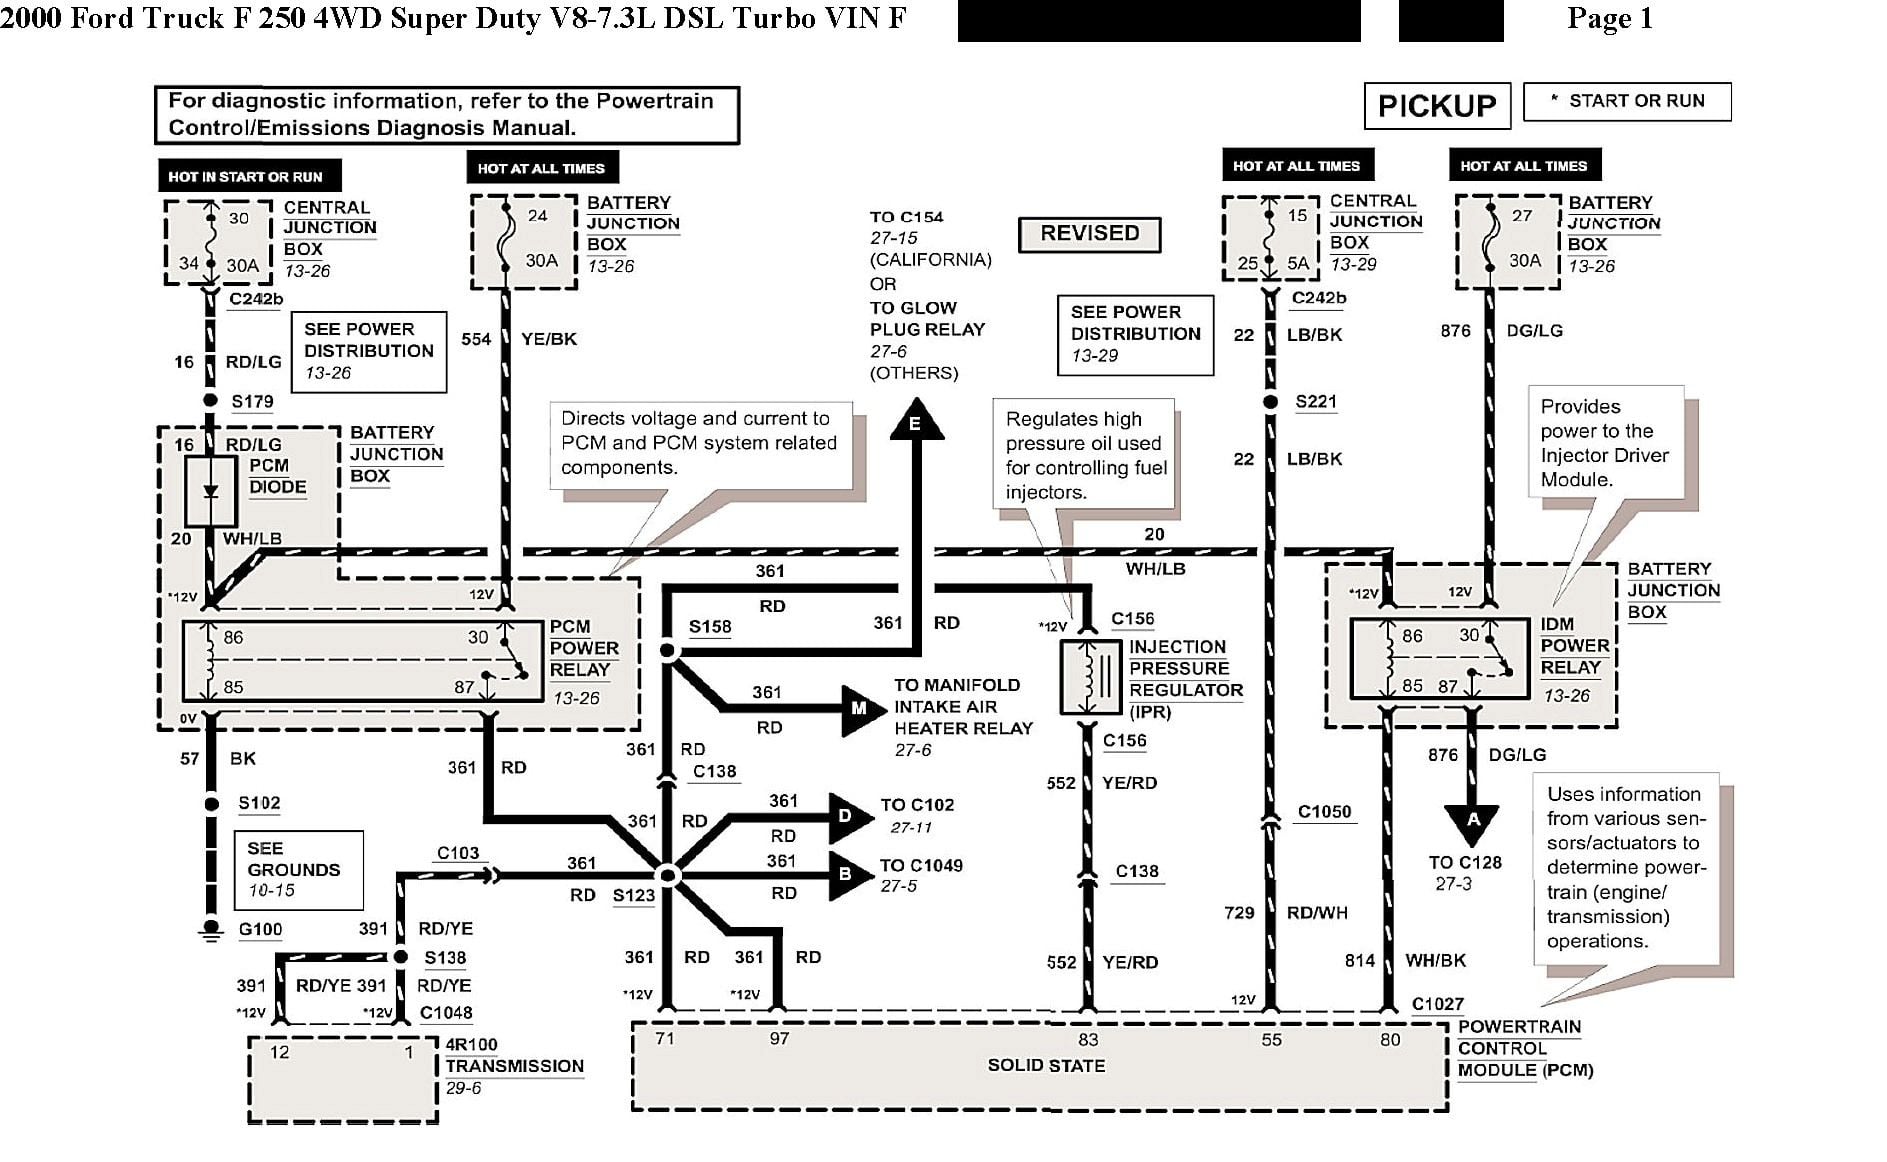 Need Ipr Wiring Info Diagram Quickly